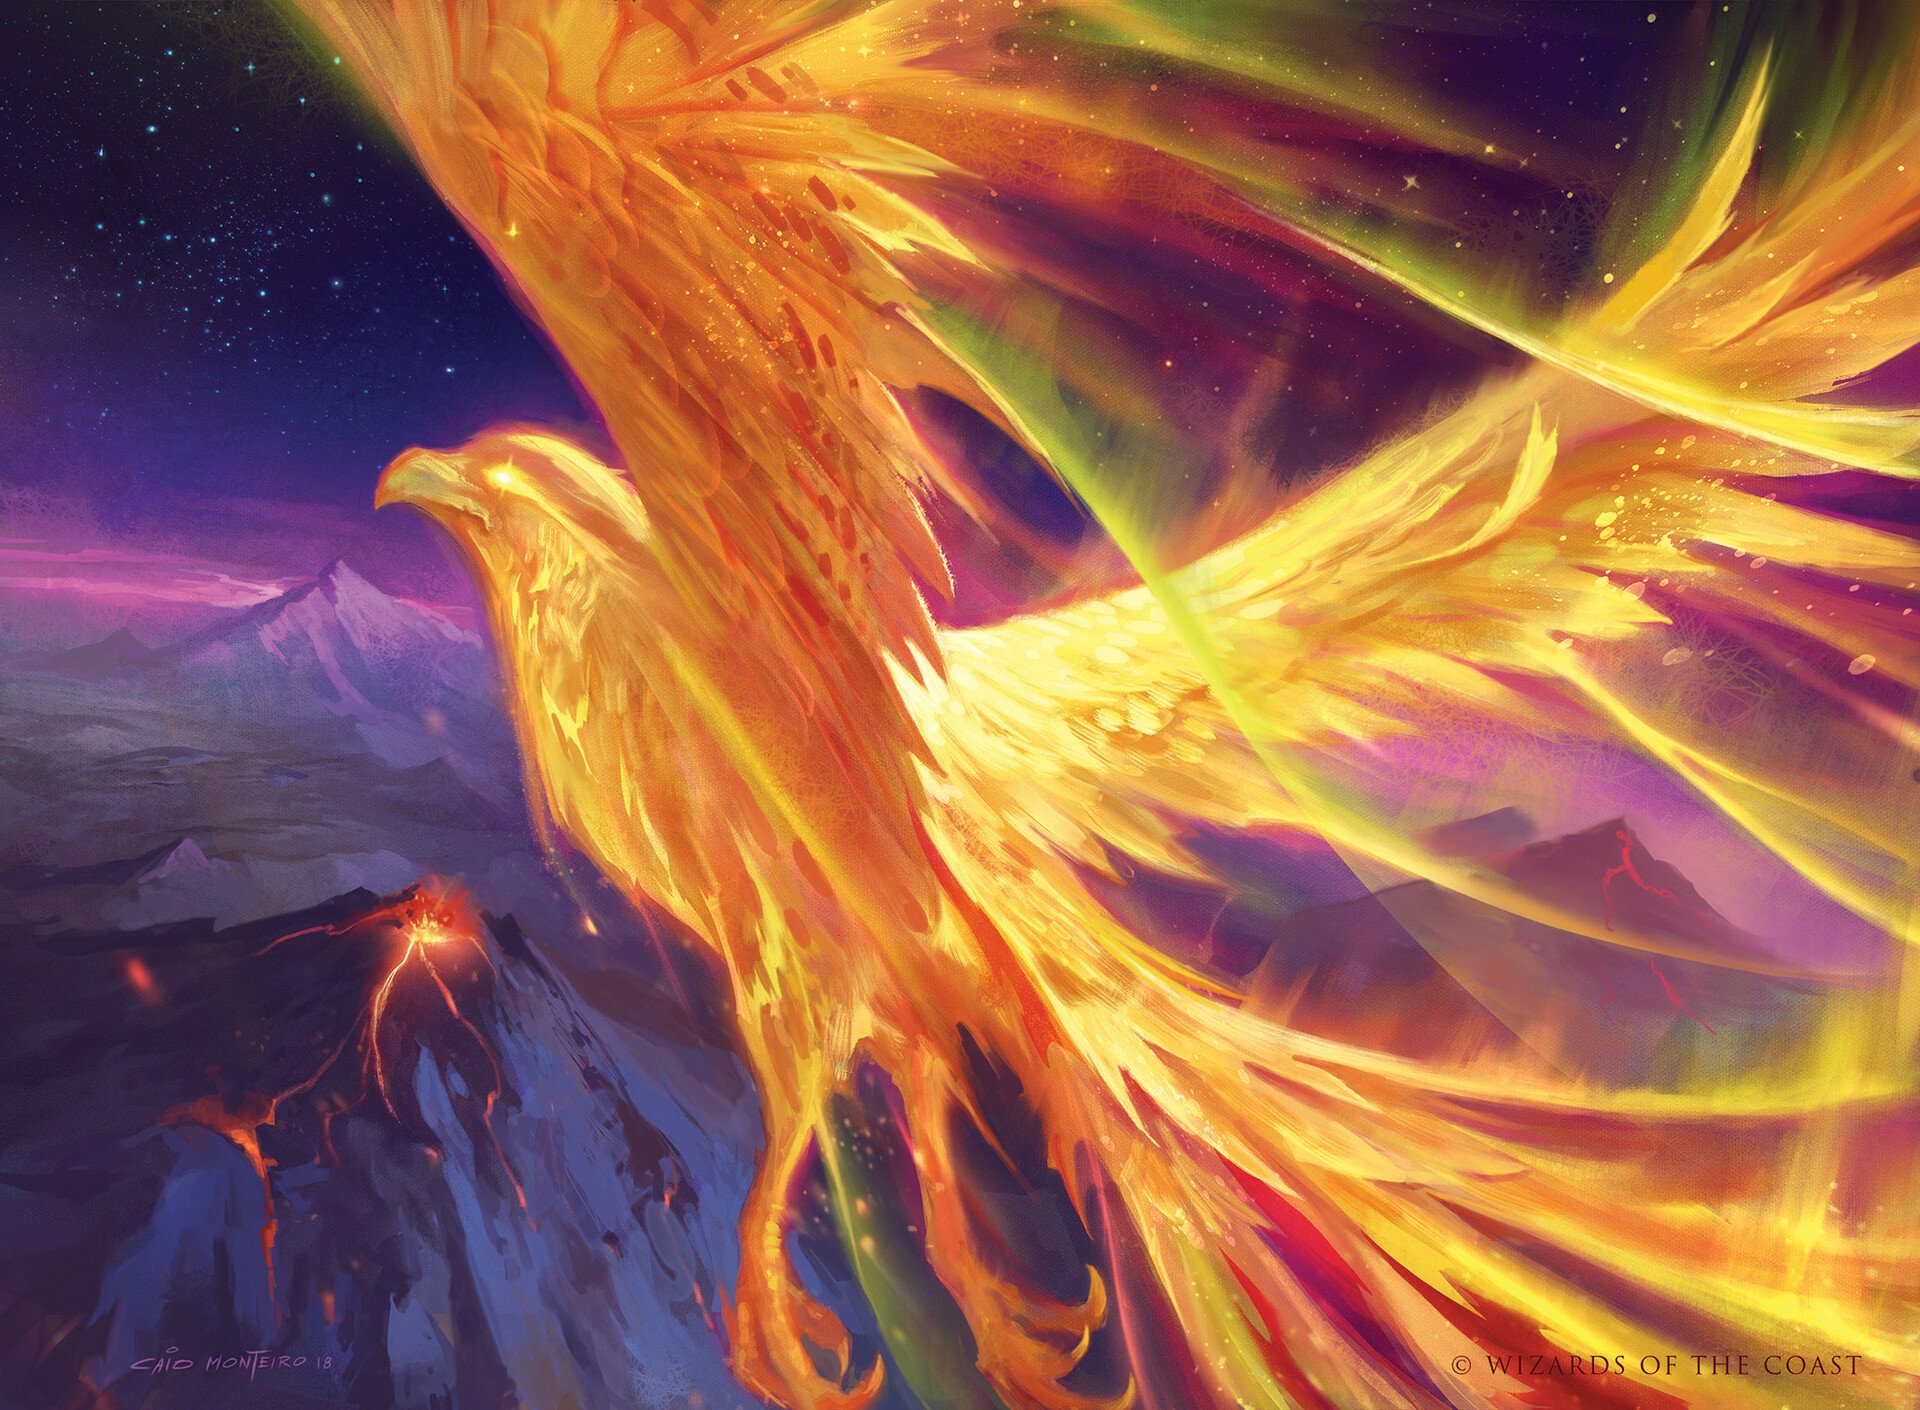 HD wallpaper of a magnificent Phoenix from Magic: The Gathering, a captivating man-made creation for fans of the game.